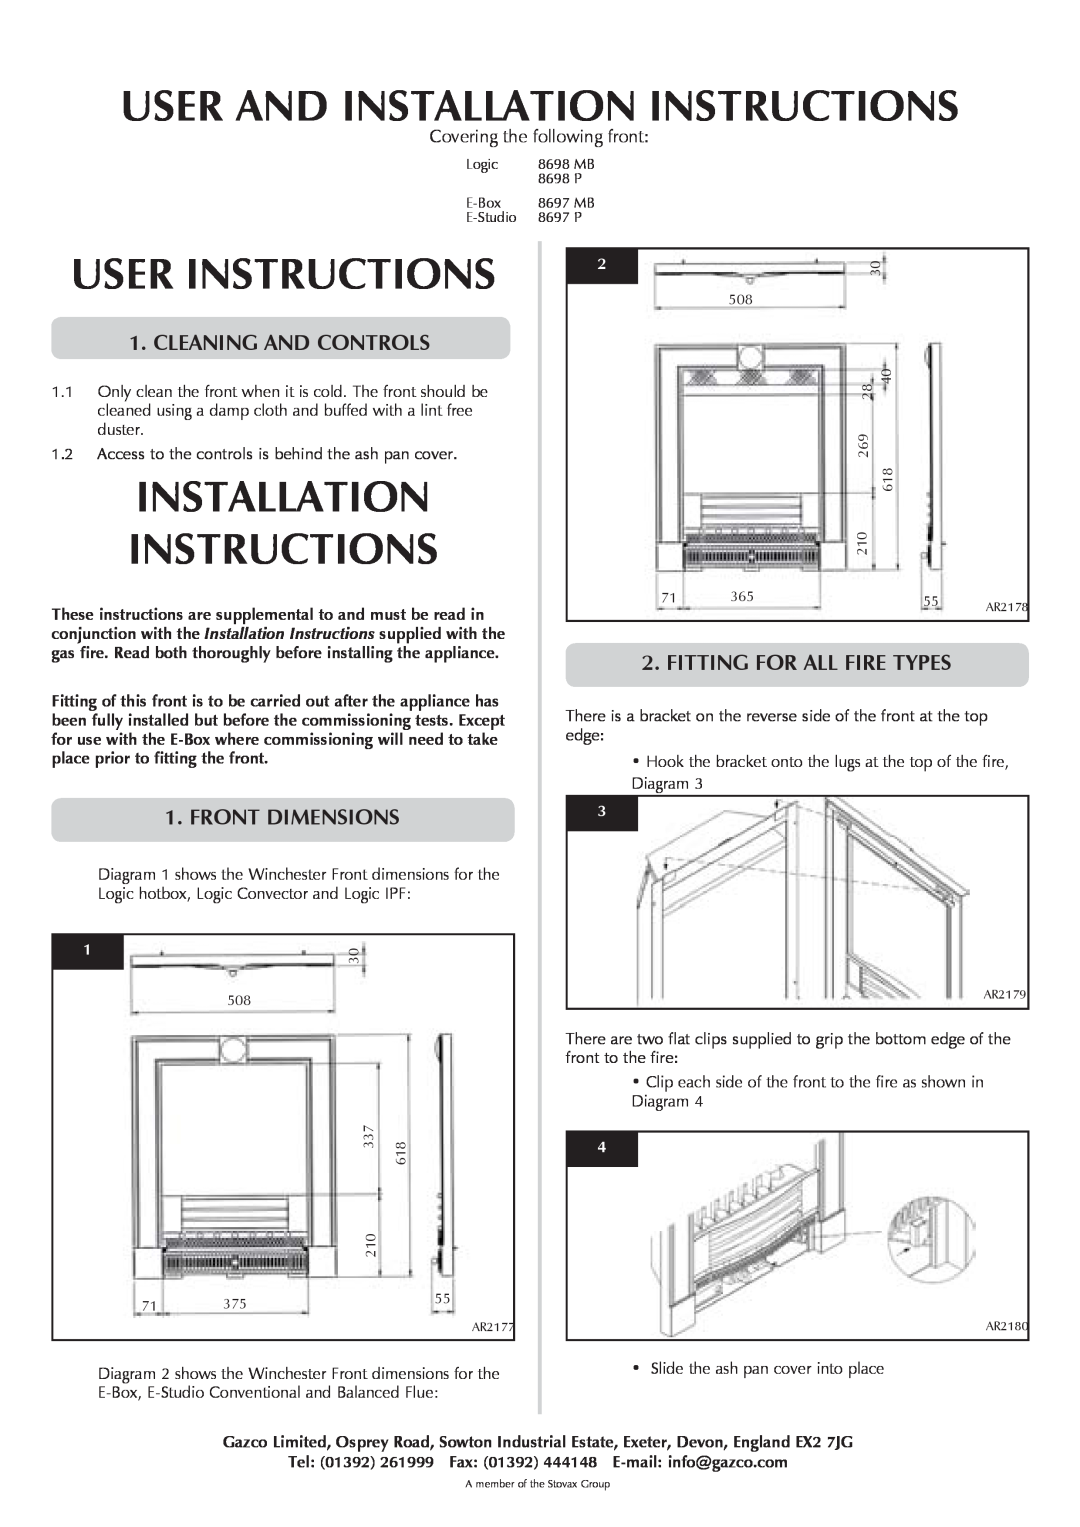 Stovax PR1018 User And Installation Instructions, User Instructions, Installation Instructions, Cleaning And Controls 